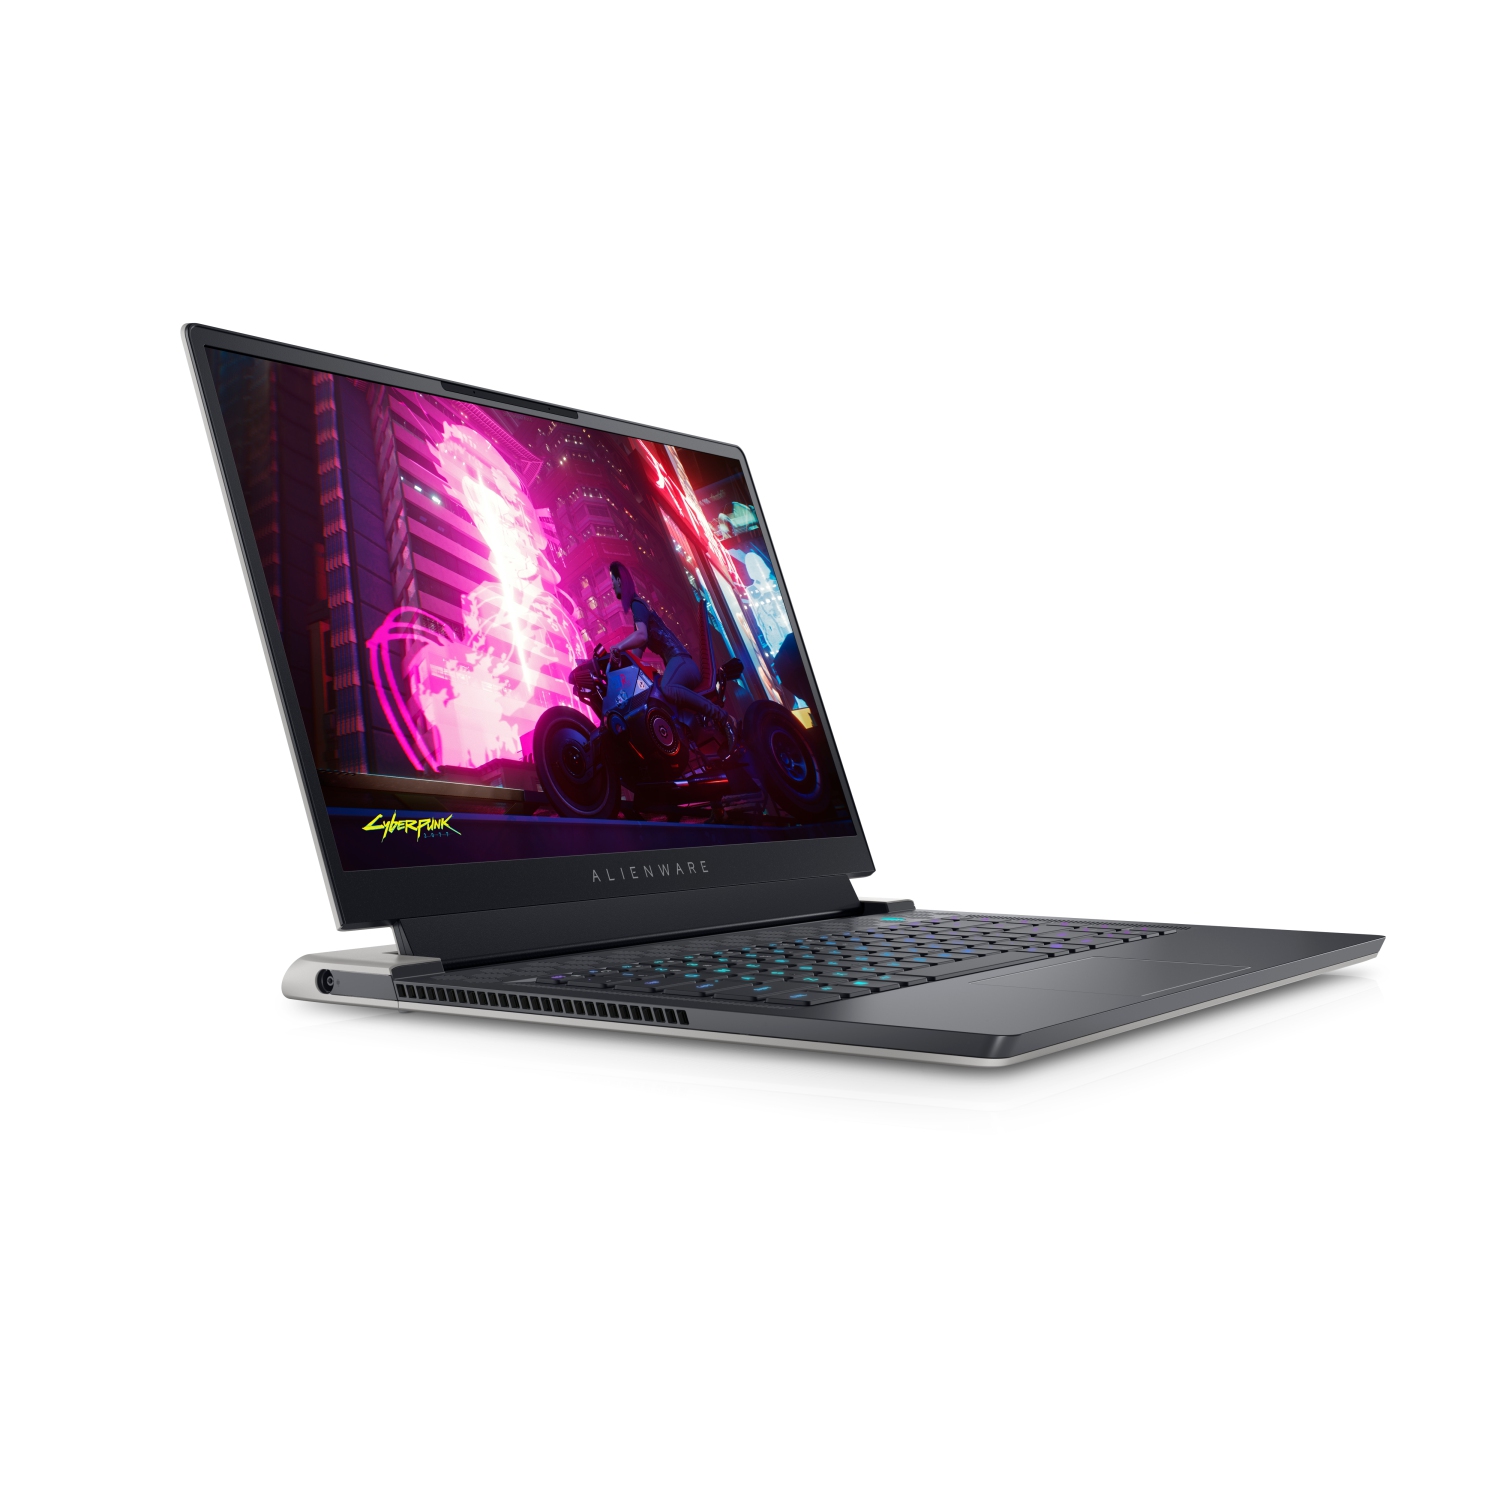 Refurbished (Excellent) - Dell Alienware X15 R1 Gaming Laptop (2021), 15.6" QHD, Core i7, 512GB SSD, 32GB RAM, RTX 3070, 8 Cores @ 4.6 GHz, 11th Gen CPU Certified